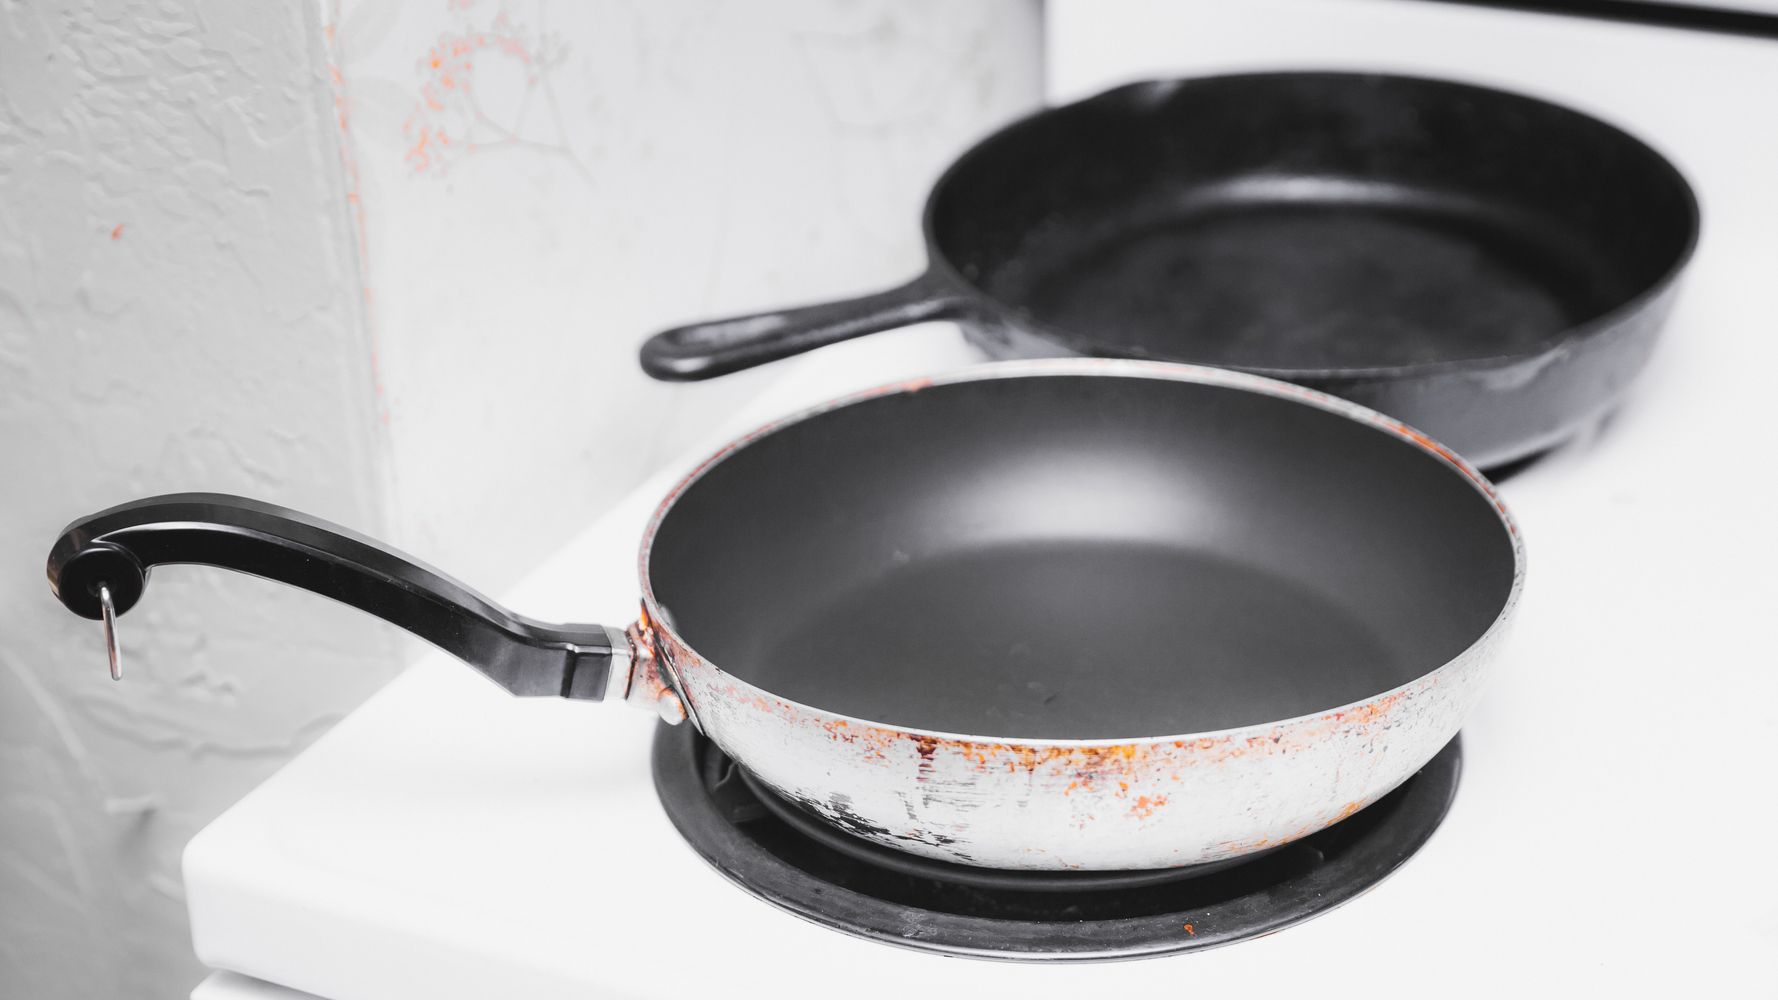 Non-stick pans can affect our hormones, new research suggests